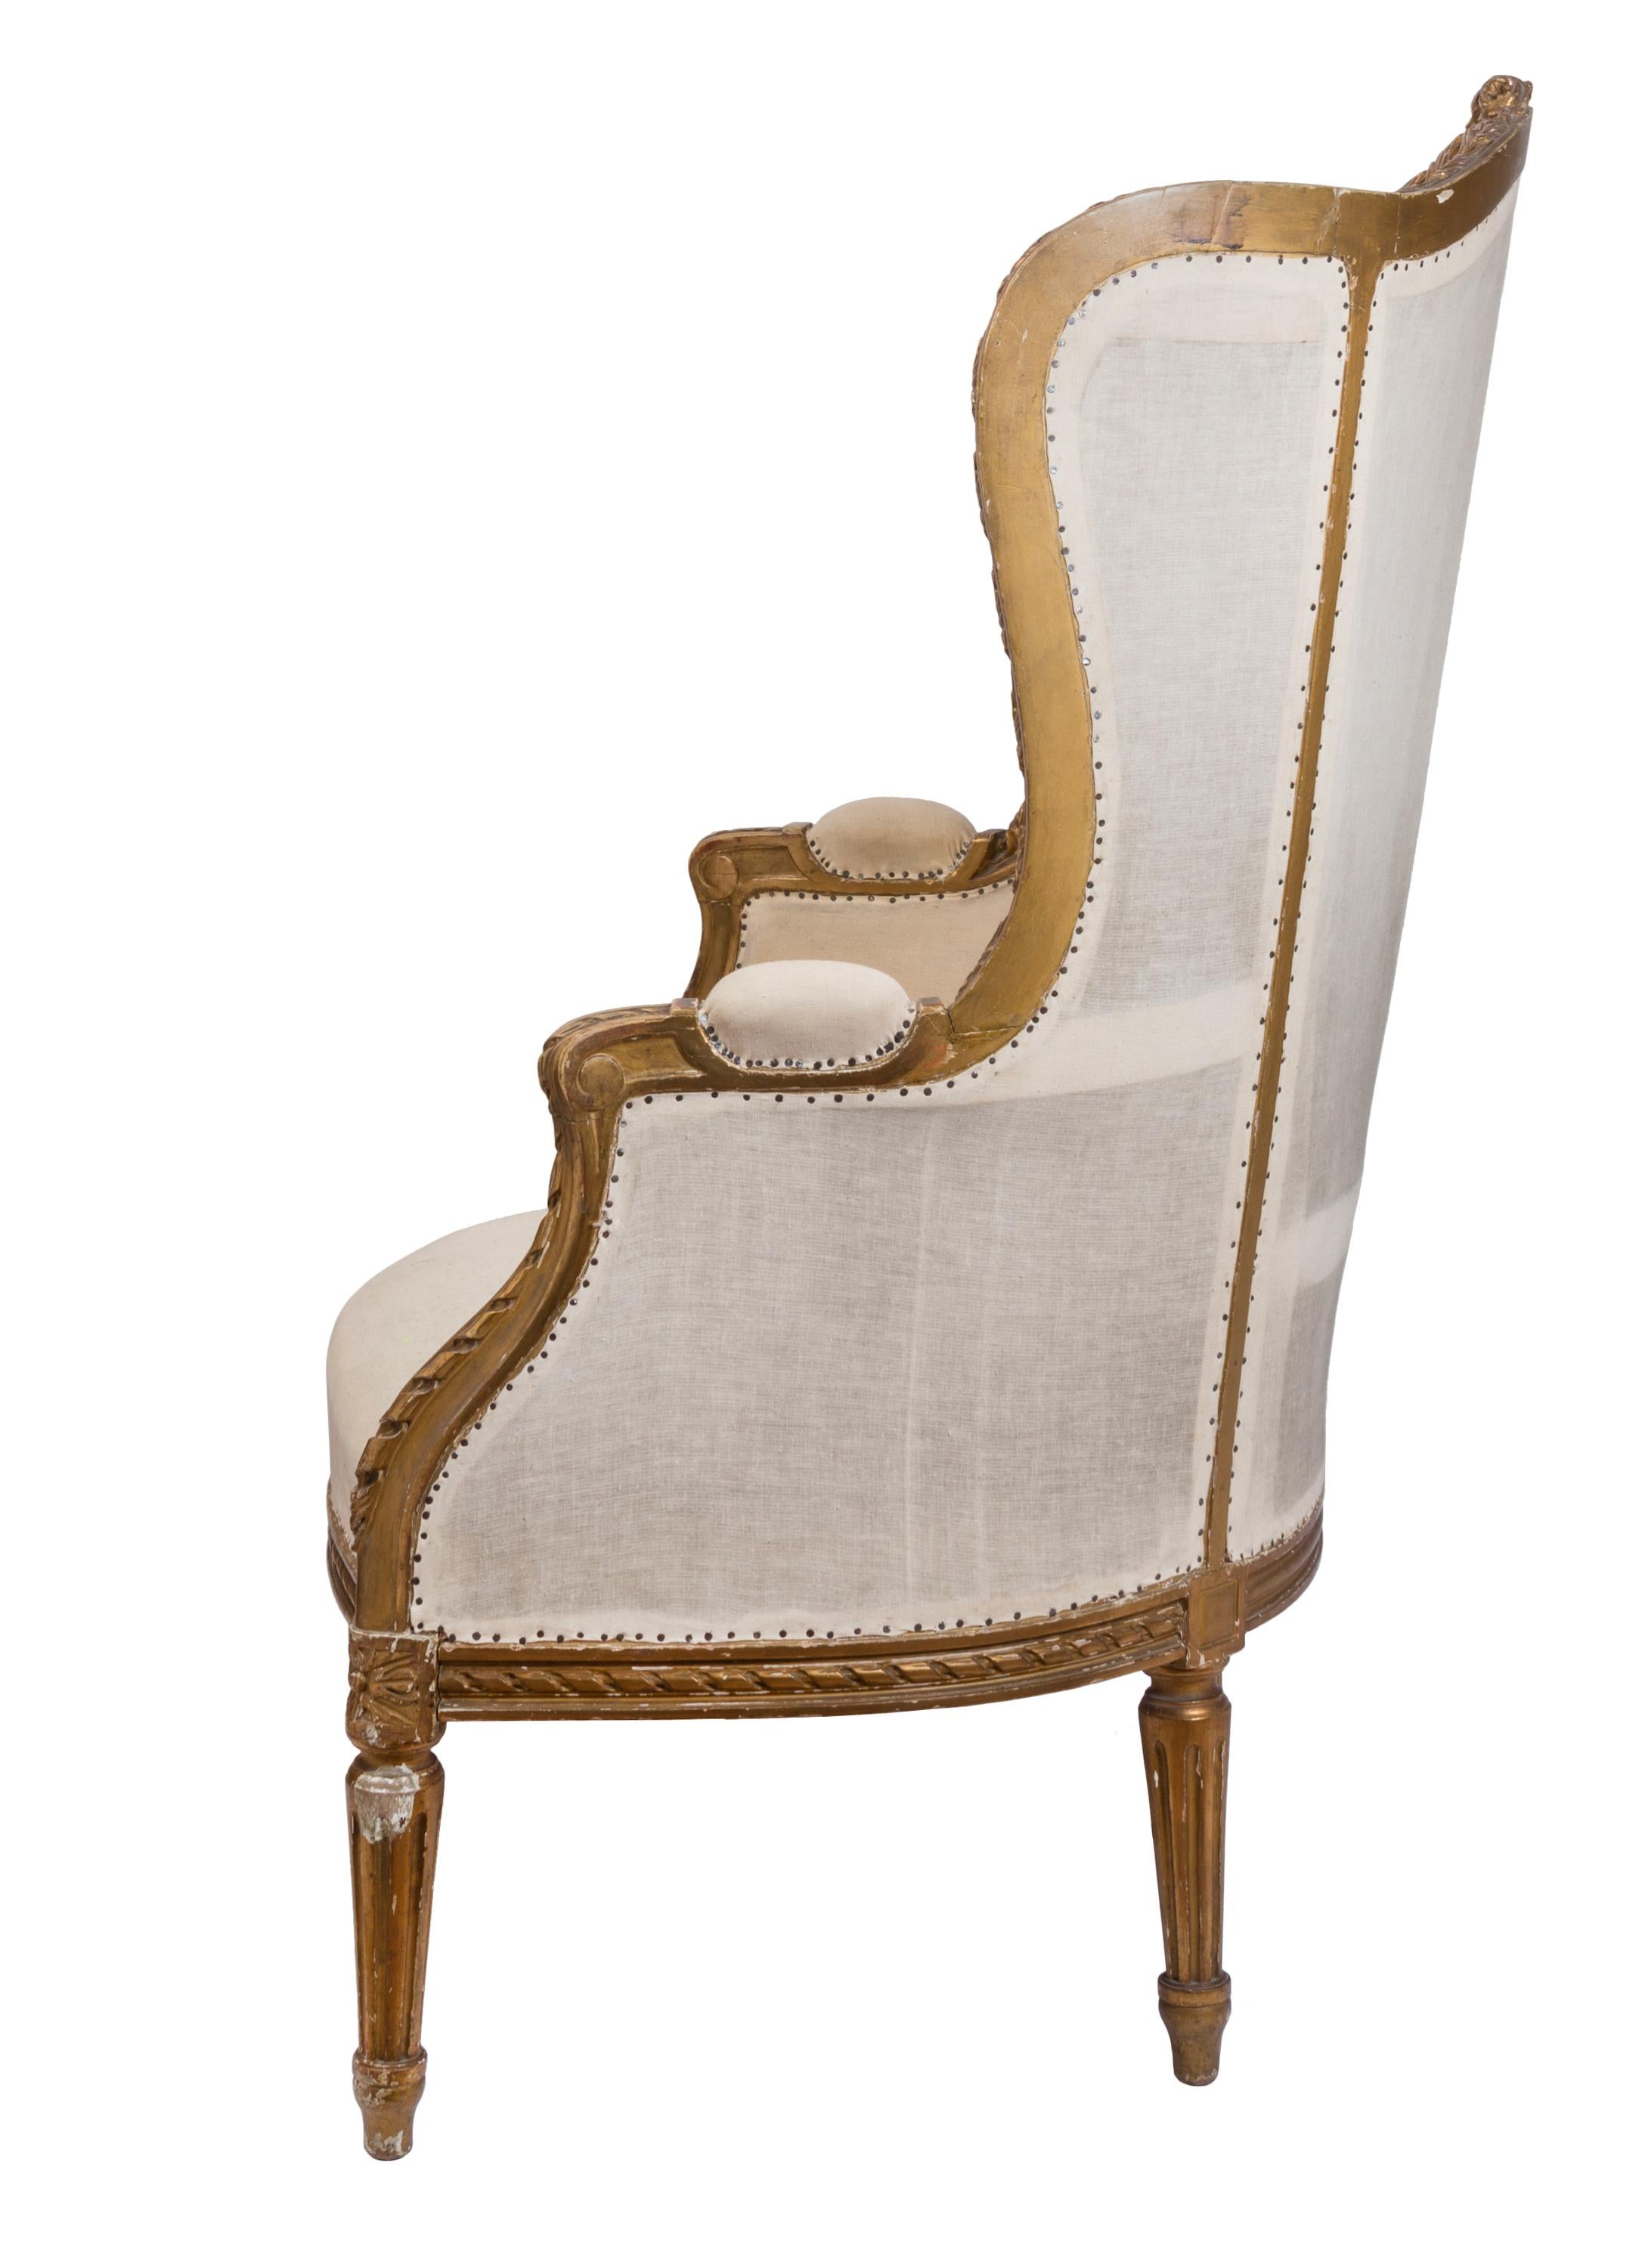 French 18th Century Louis XVI Bergère / Wingback Armchair with Carved Giltwood Details